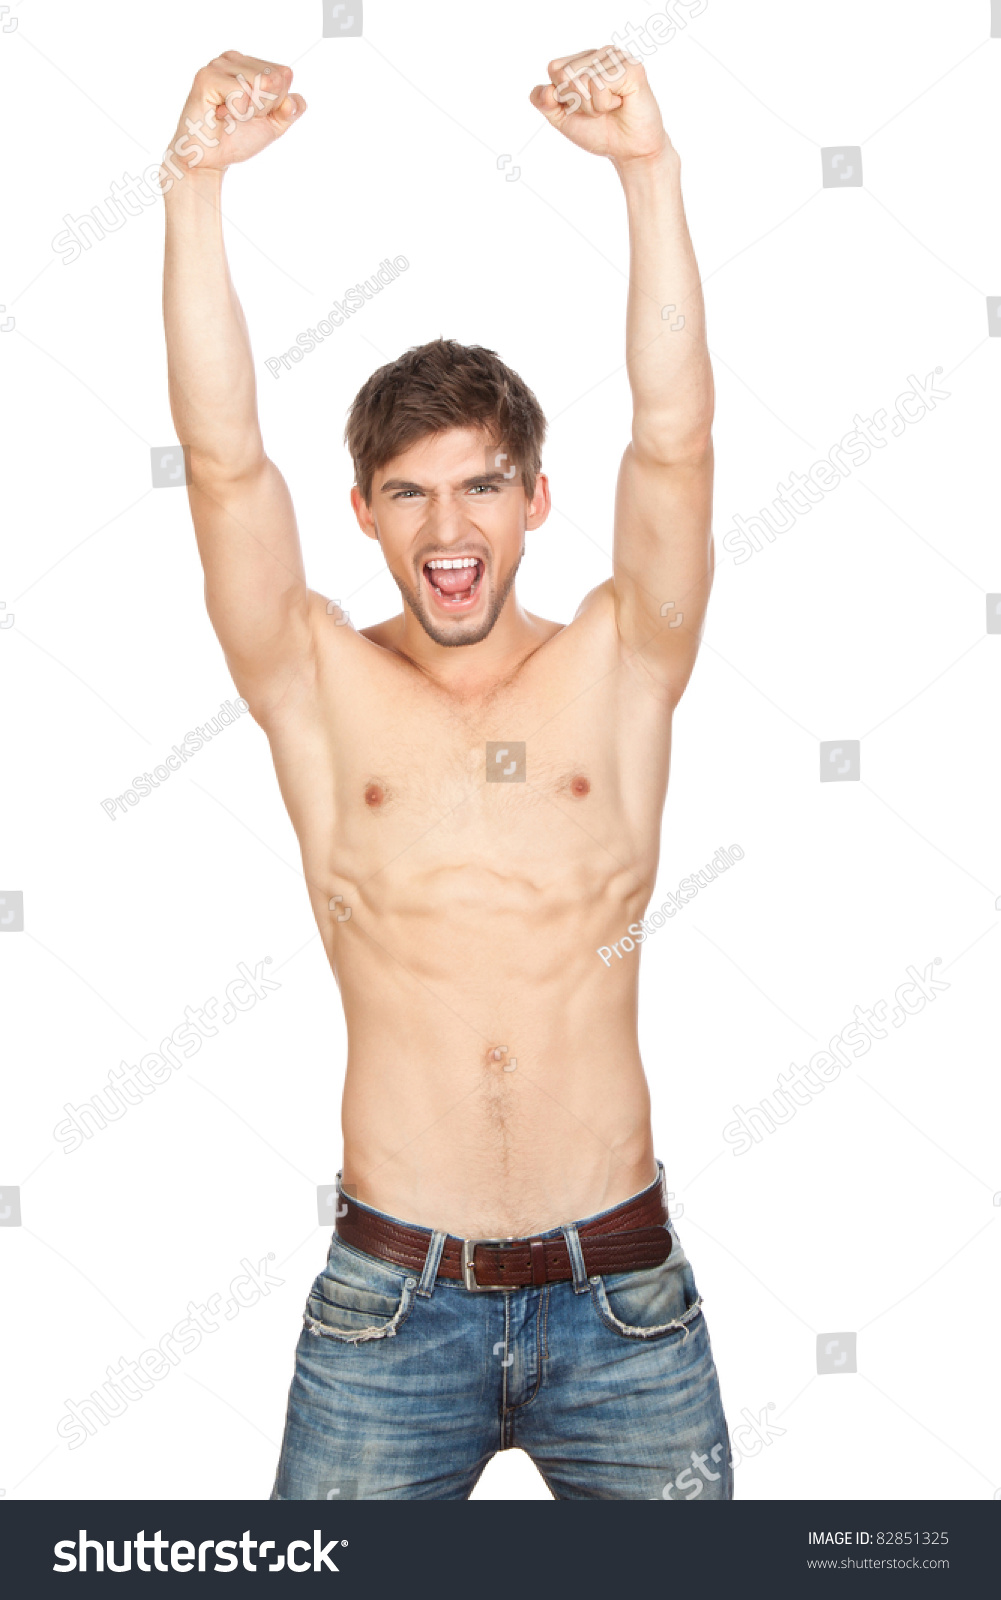 Muscular Young Naked Sexy Boy Posing Stock Photo 92182393 